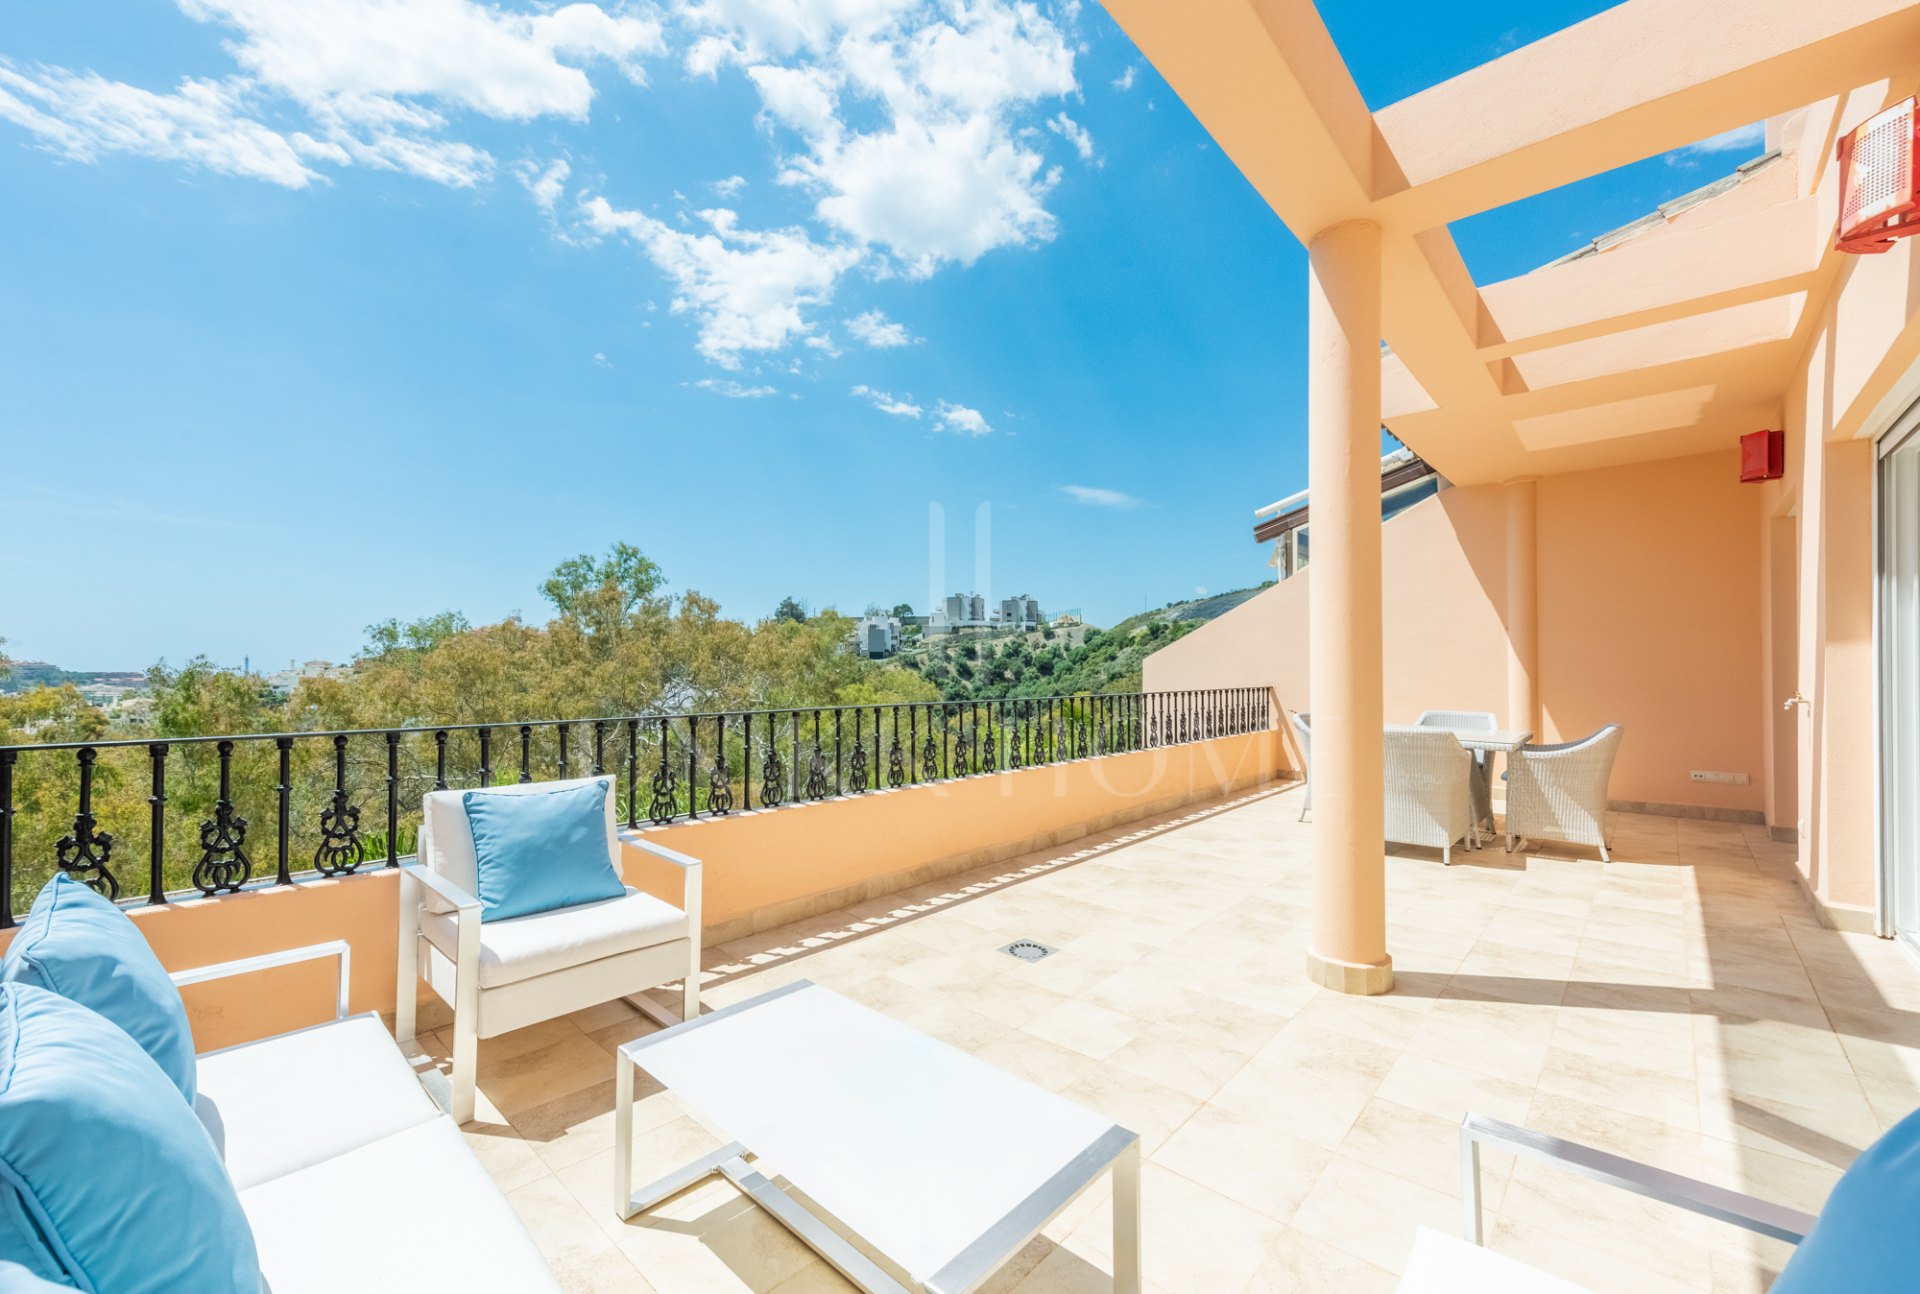 Wonderful duplex penthouse in Vista Real, at the top of Nueva Andalucia! Best priced penthouse in the complex!